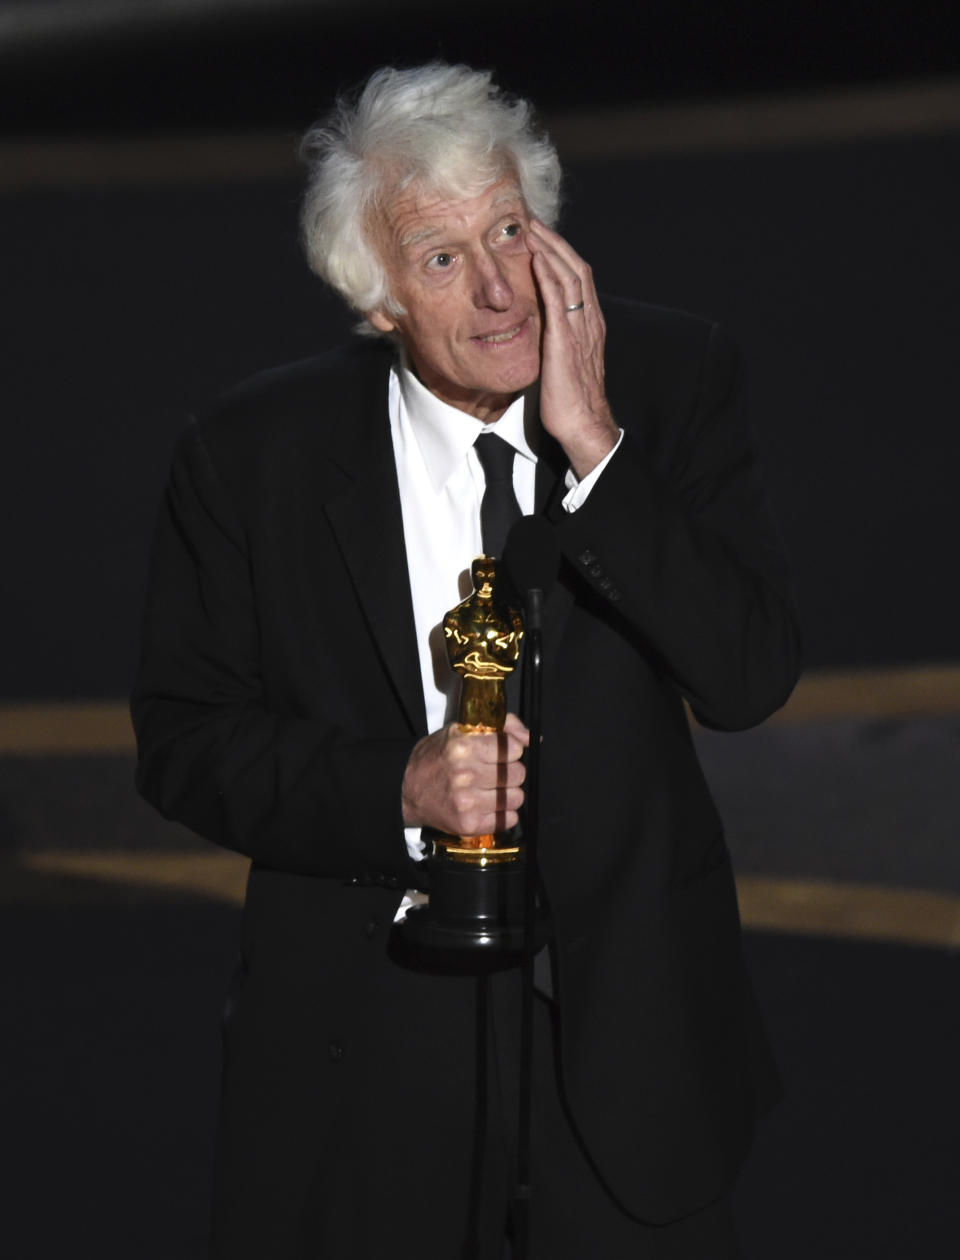 FILE - Roger Deakins accepts the award for best cinematography for "1917" at the Oscars on Feb. 9, 2020, in Los Angeles. His podcast with his wife, James Deakins, is one of the most revealing looks at behind-the-camera film work. (AP Photo/Chris Pizzello, File)